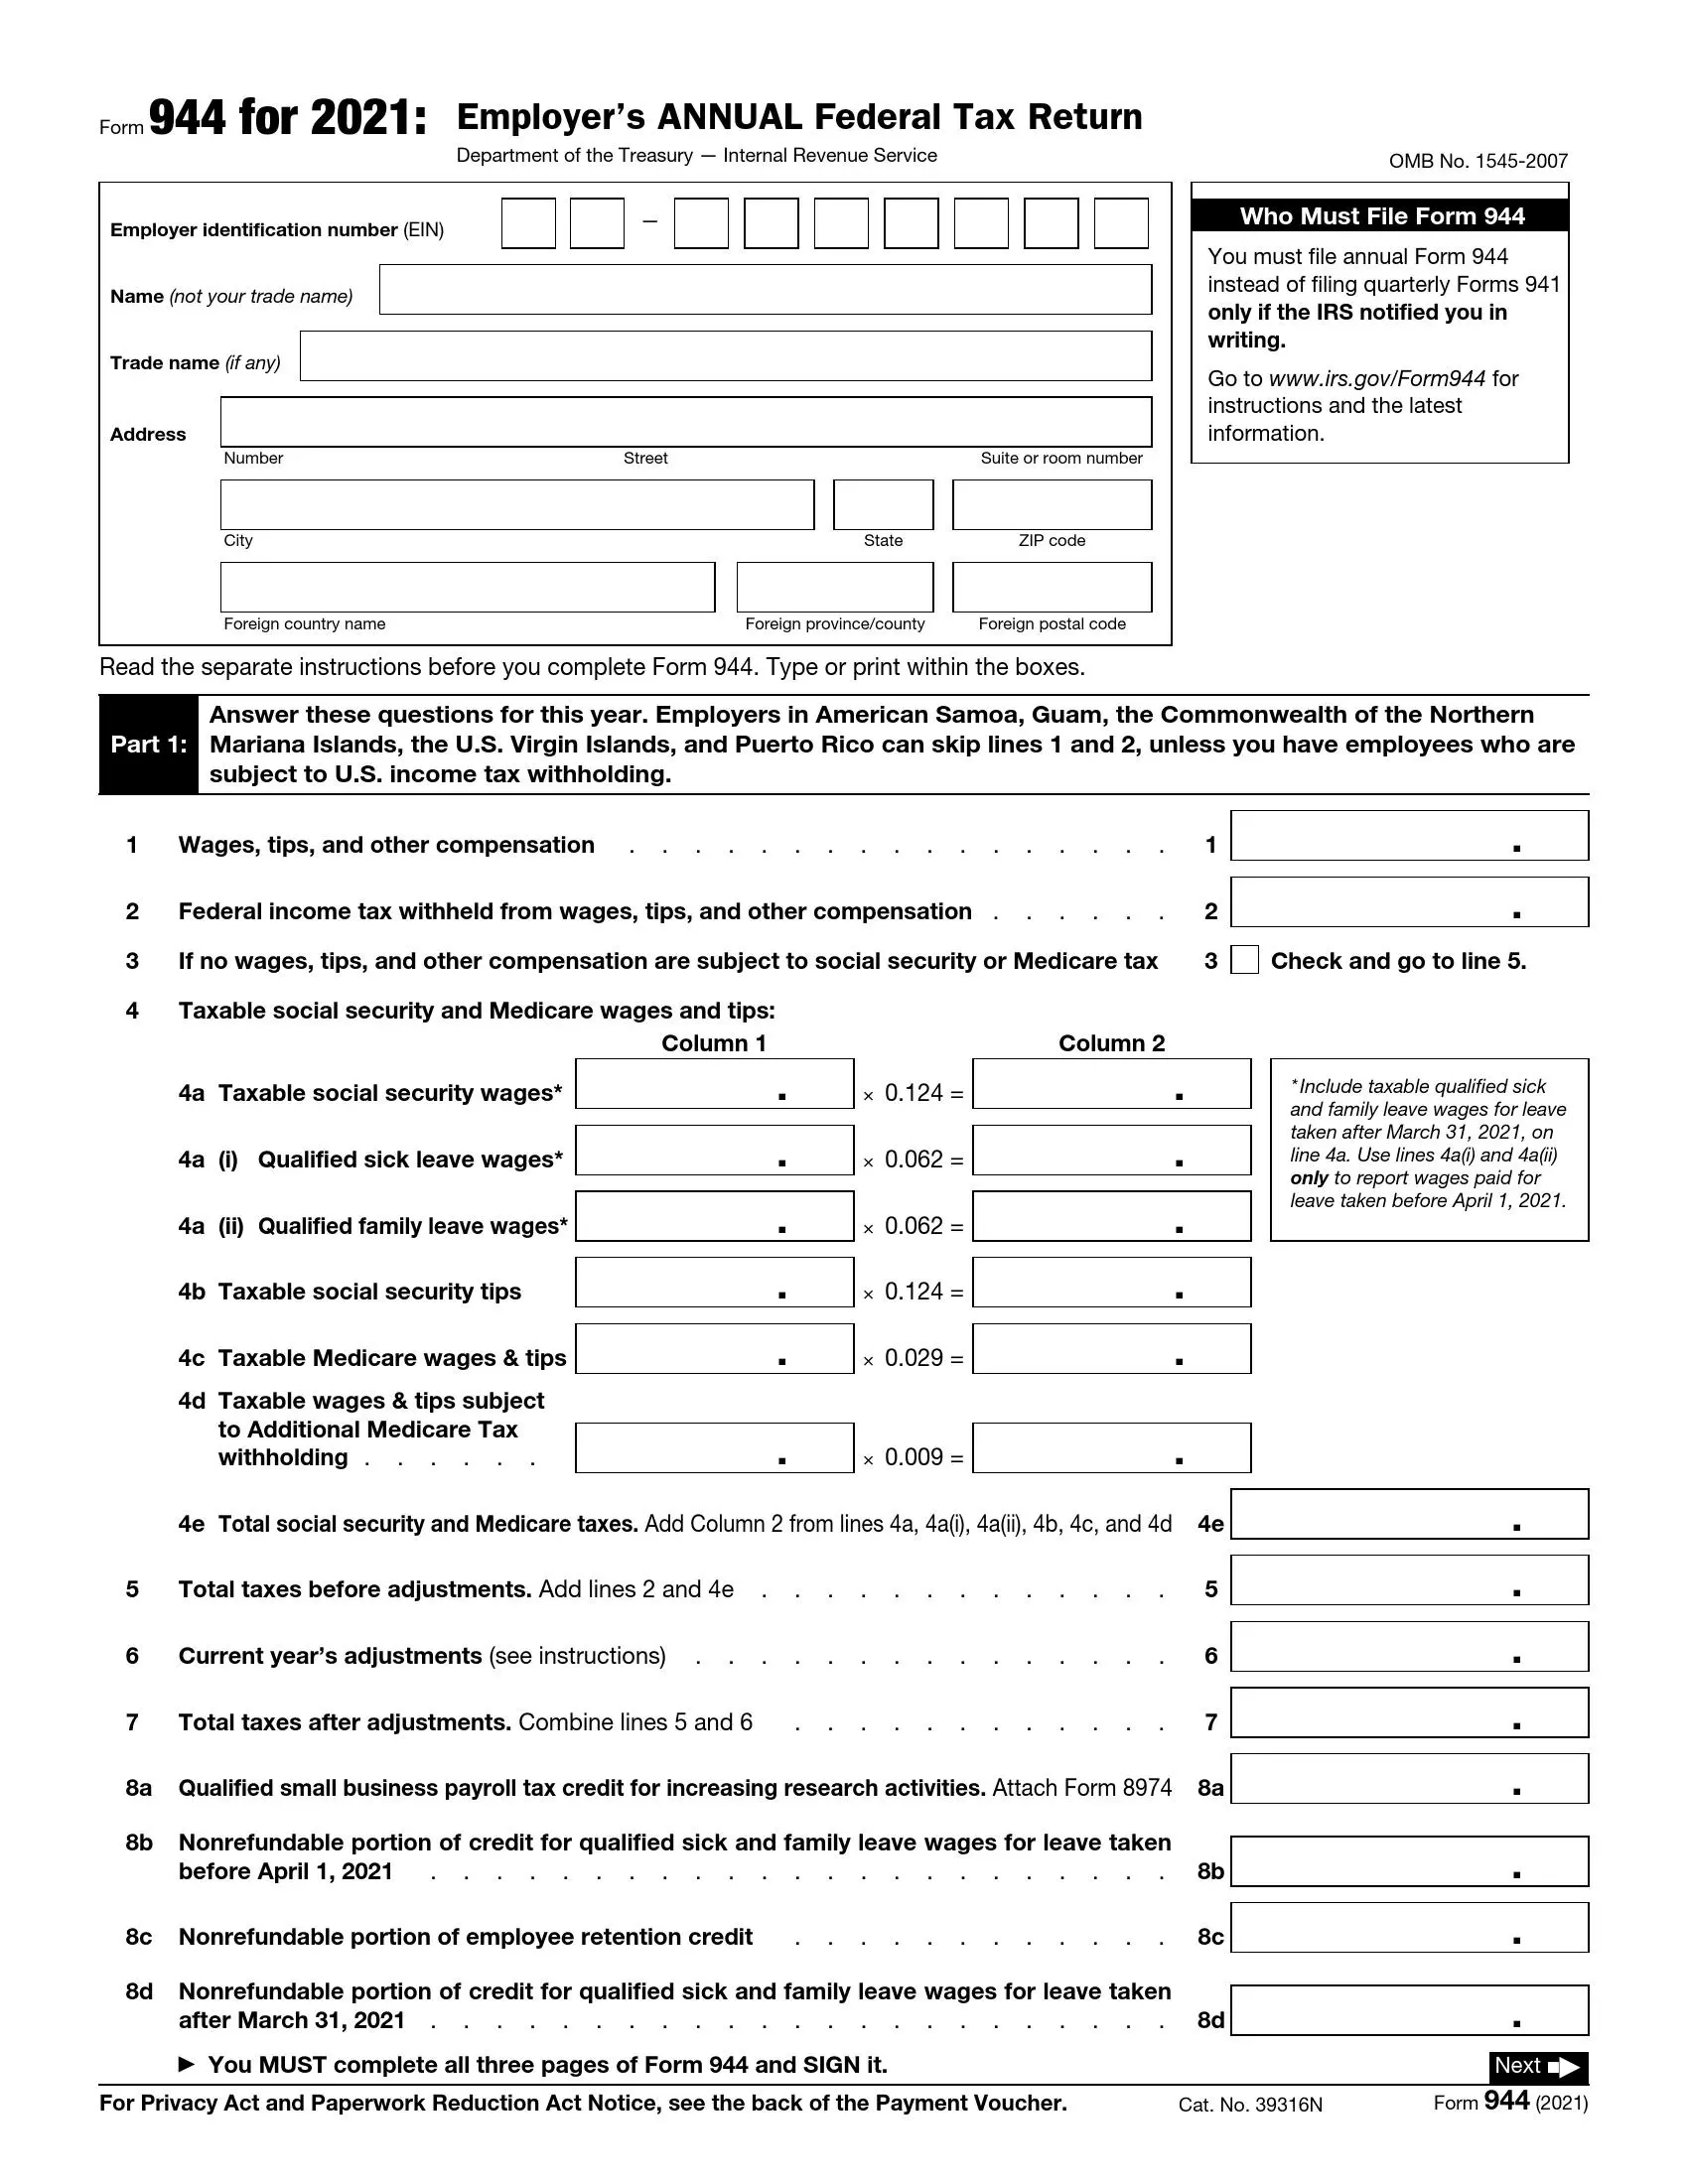 irs form 944 2021 preview